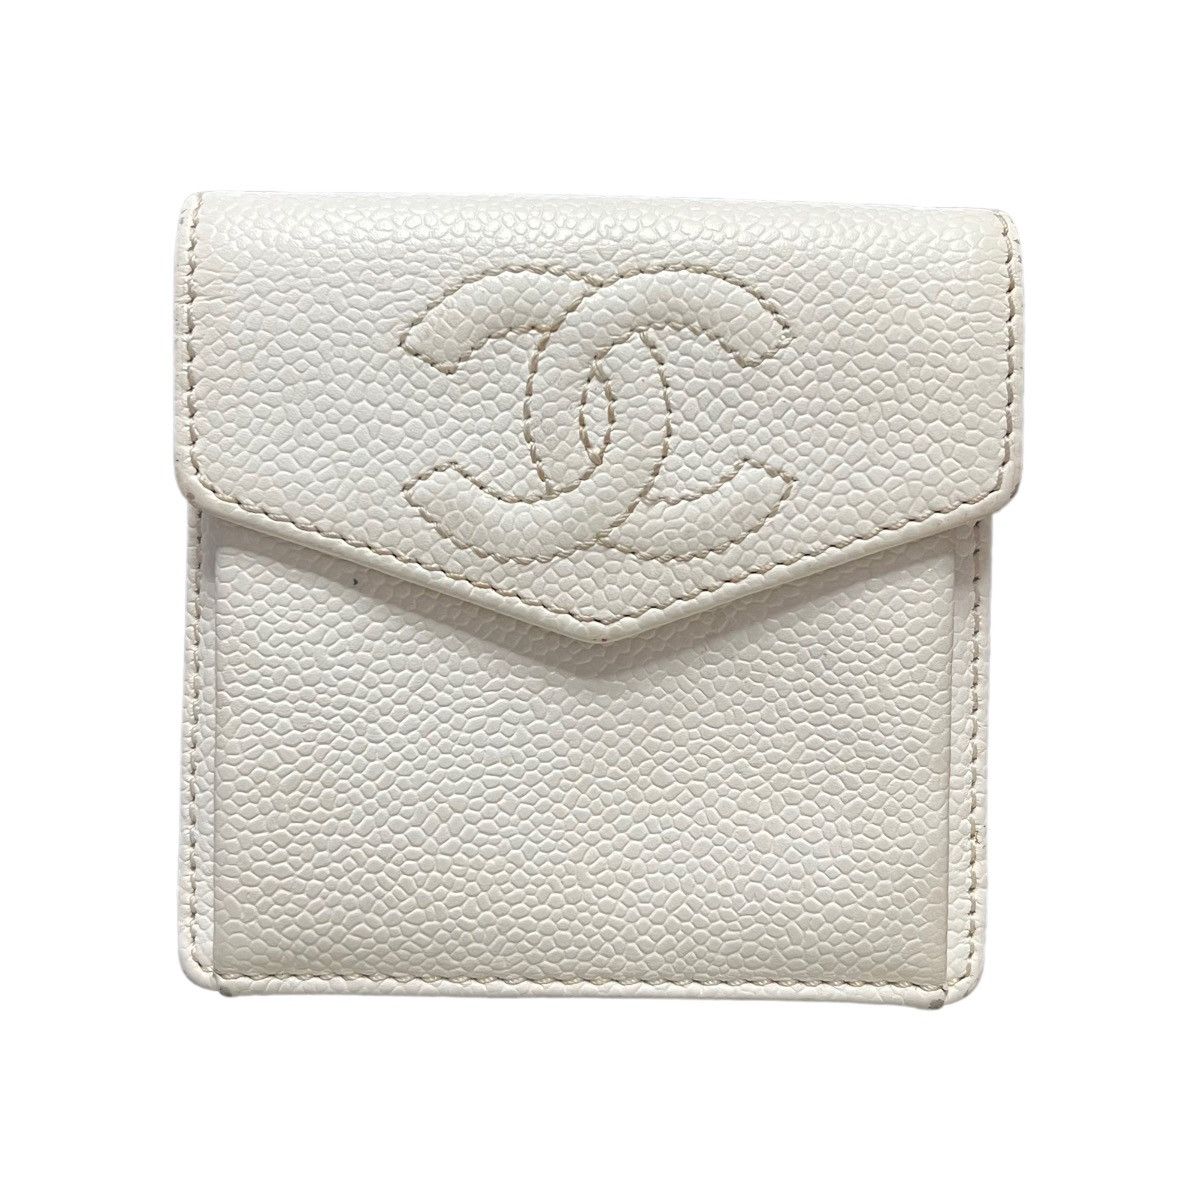 CHANEL Authentic CC Filigree Caviar Skin Leather Trifold Wallet